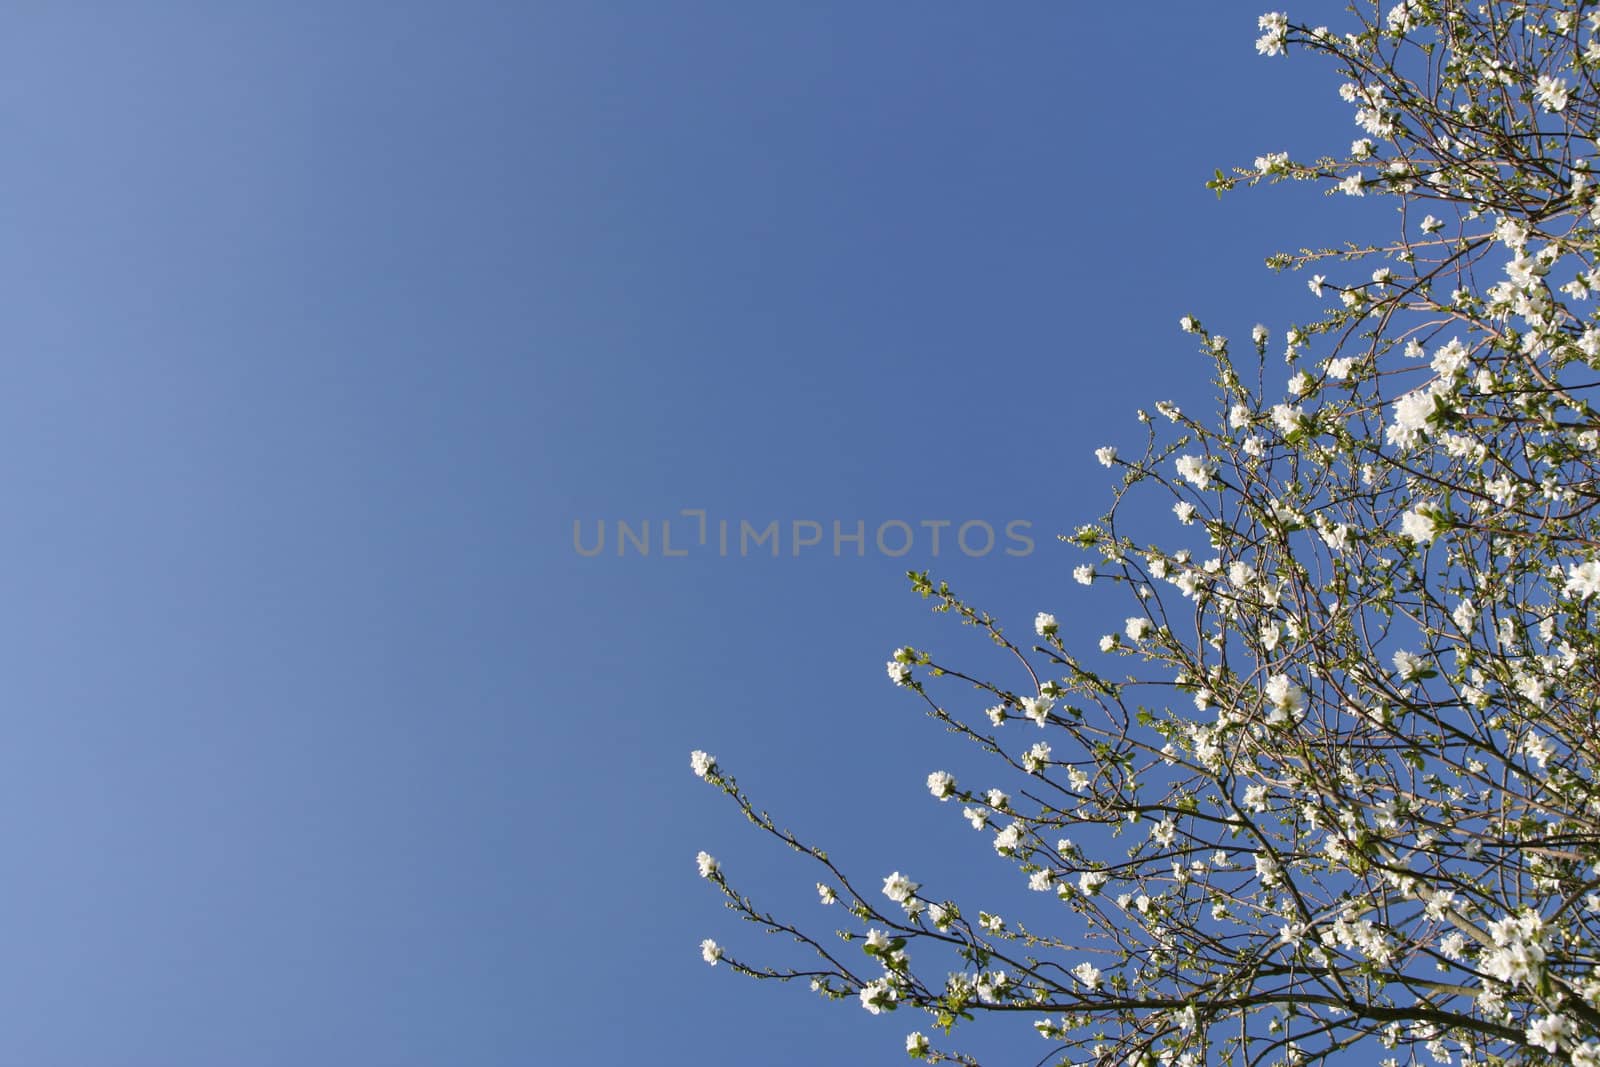 Shrub with white flowers over a shaded blue sky (horizontal)